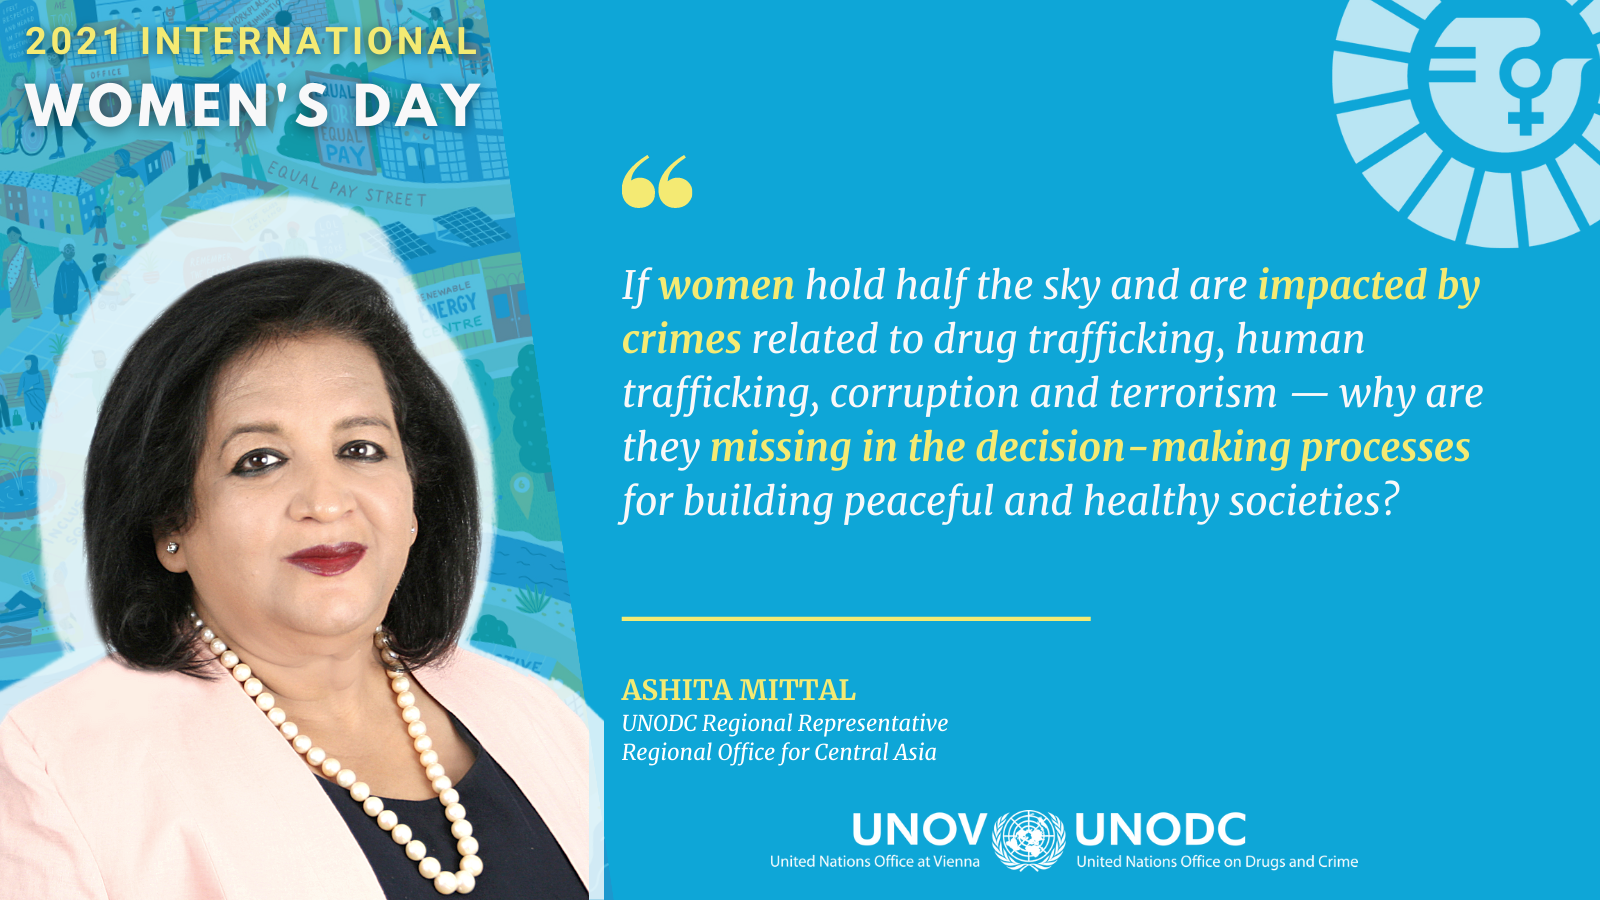 Quote of Ashita Mittal "I want all women, not only colleagues, but also partners, donors, and beneficiaries to feel supported, safe, free and ultimately empowered and eager to support others."